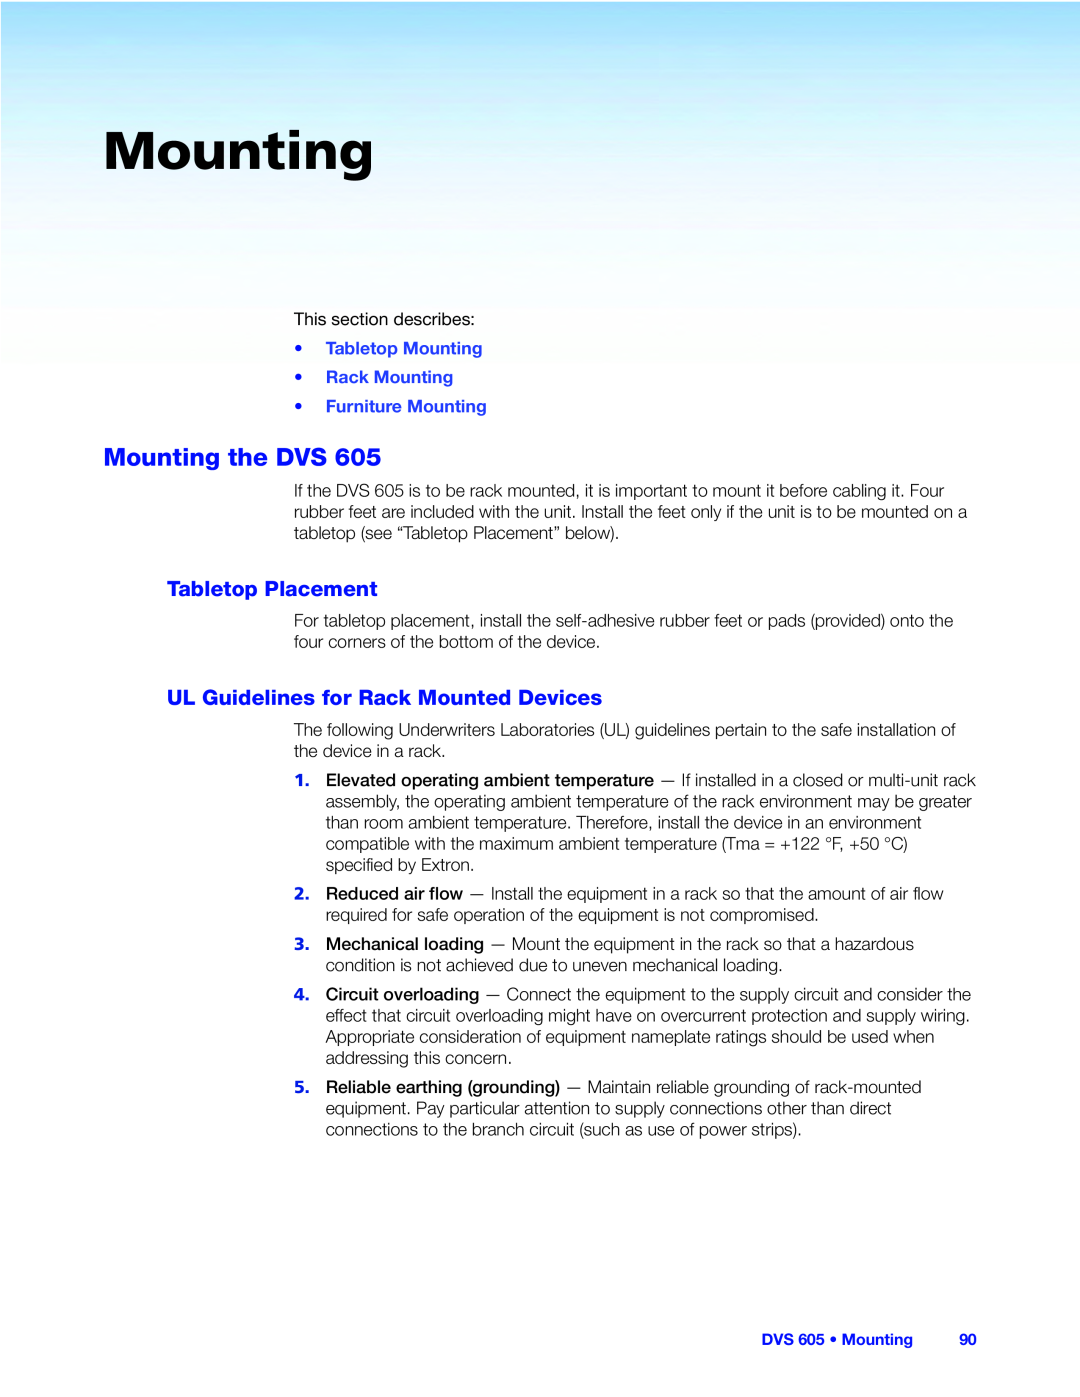 Extron electronic DVS 605 manual Mounting the DVS, Tabletop Placement, UL Guidelines for Rack Mounted Devices 